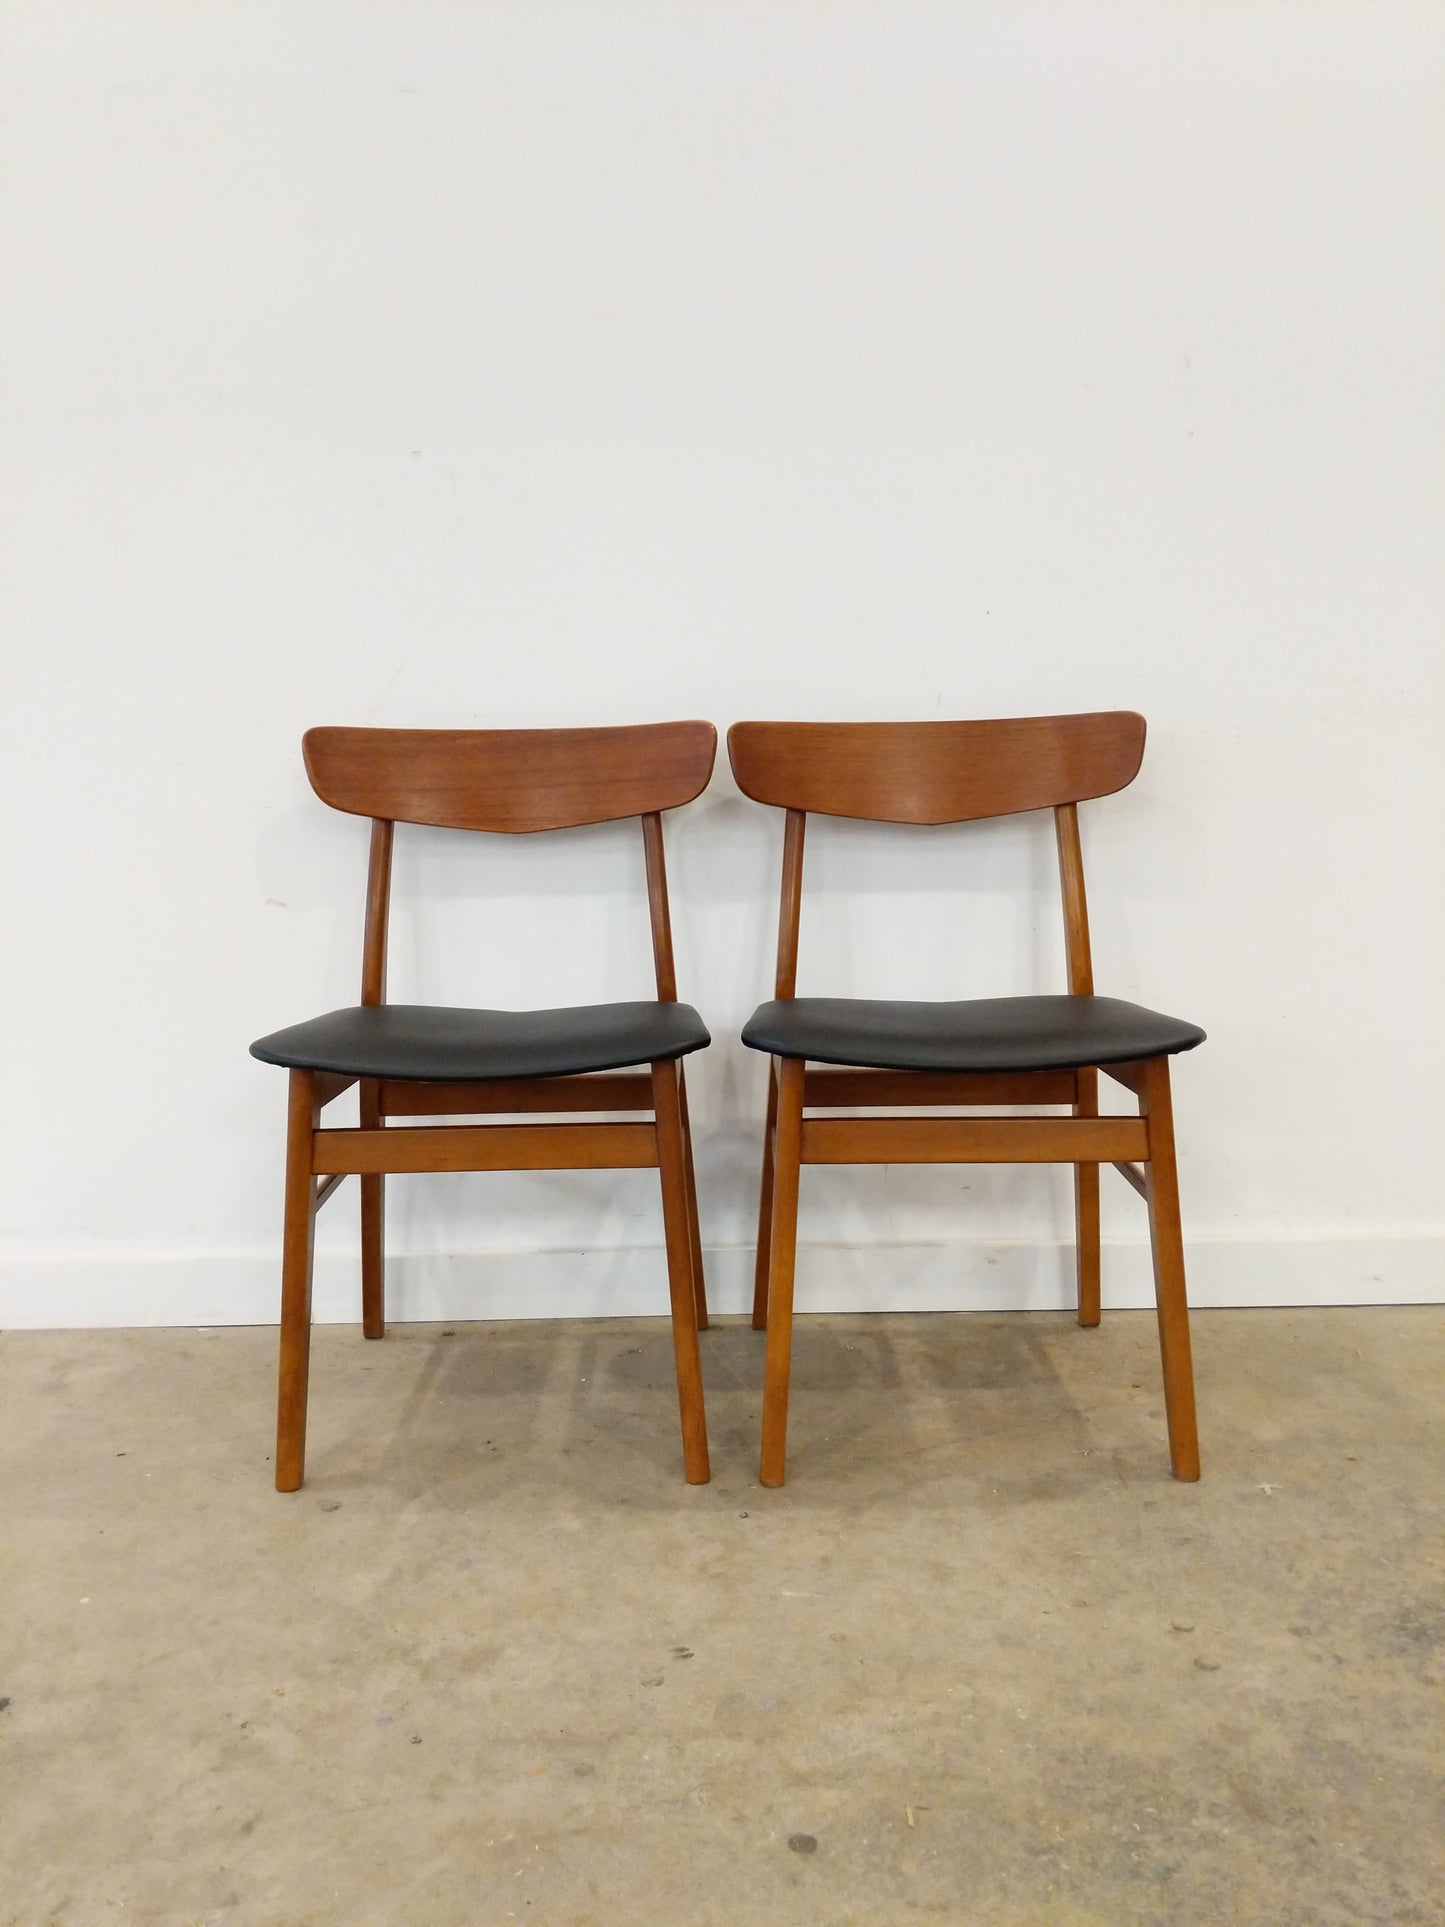 Pair of Vintage Danish Modern Dining Chairs by Farstrup